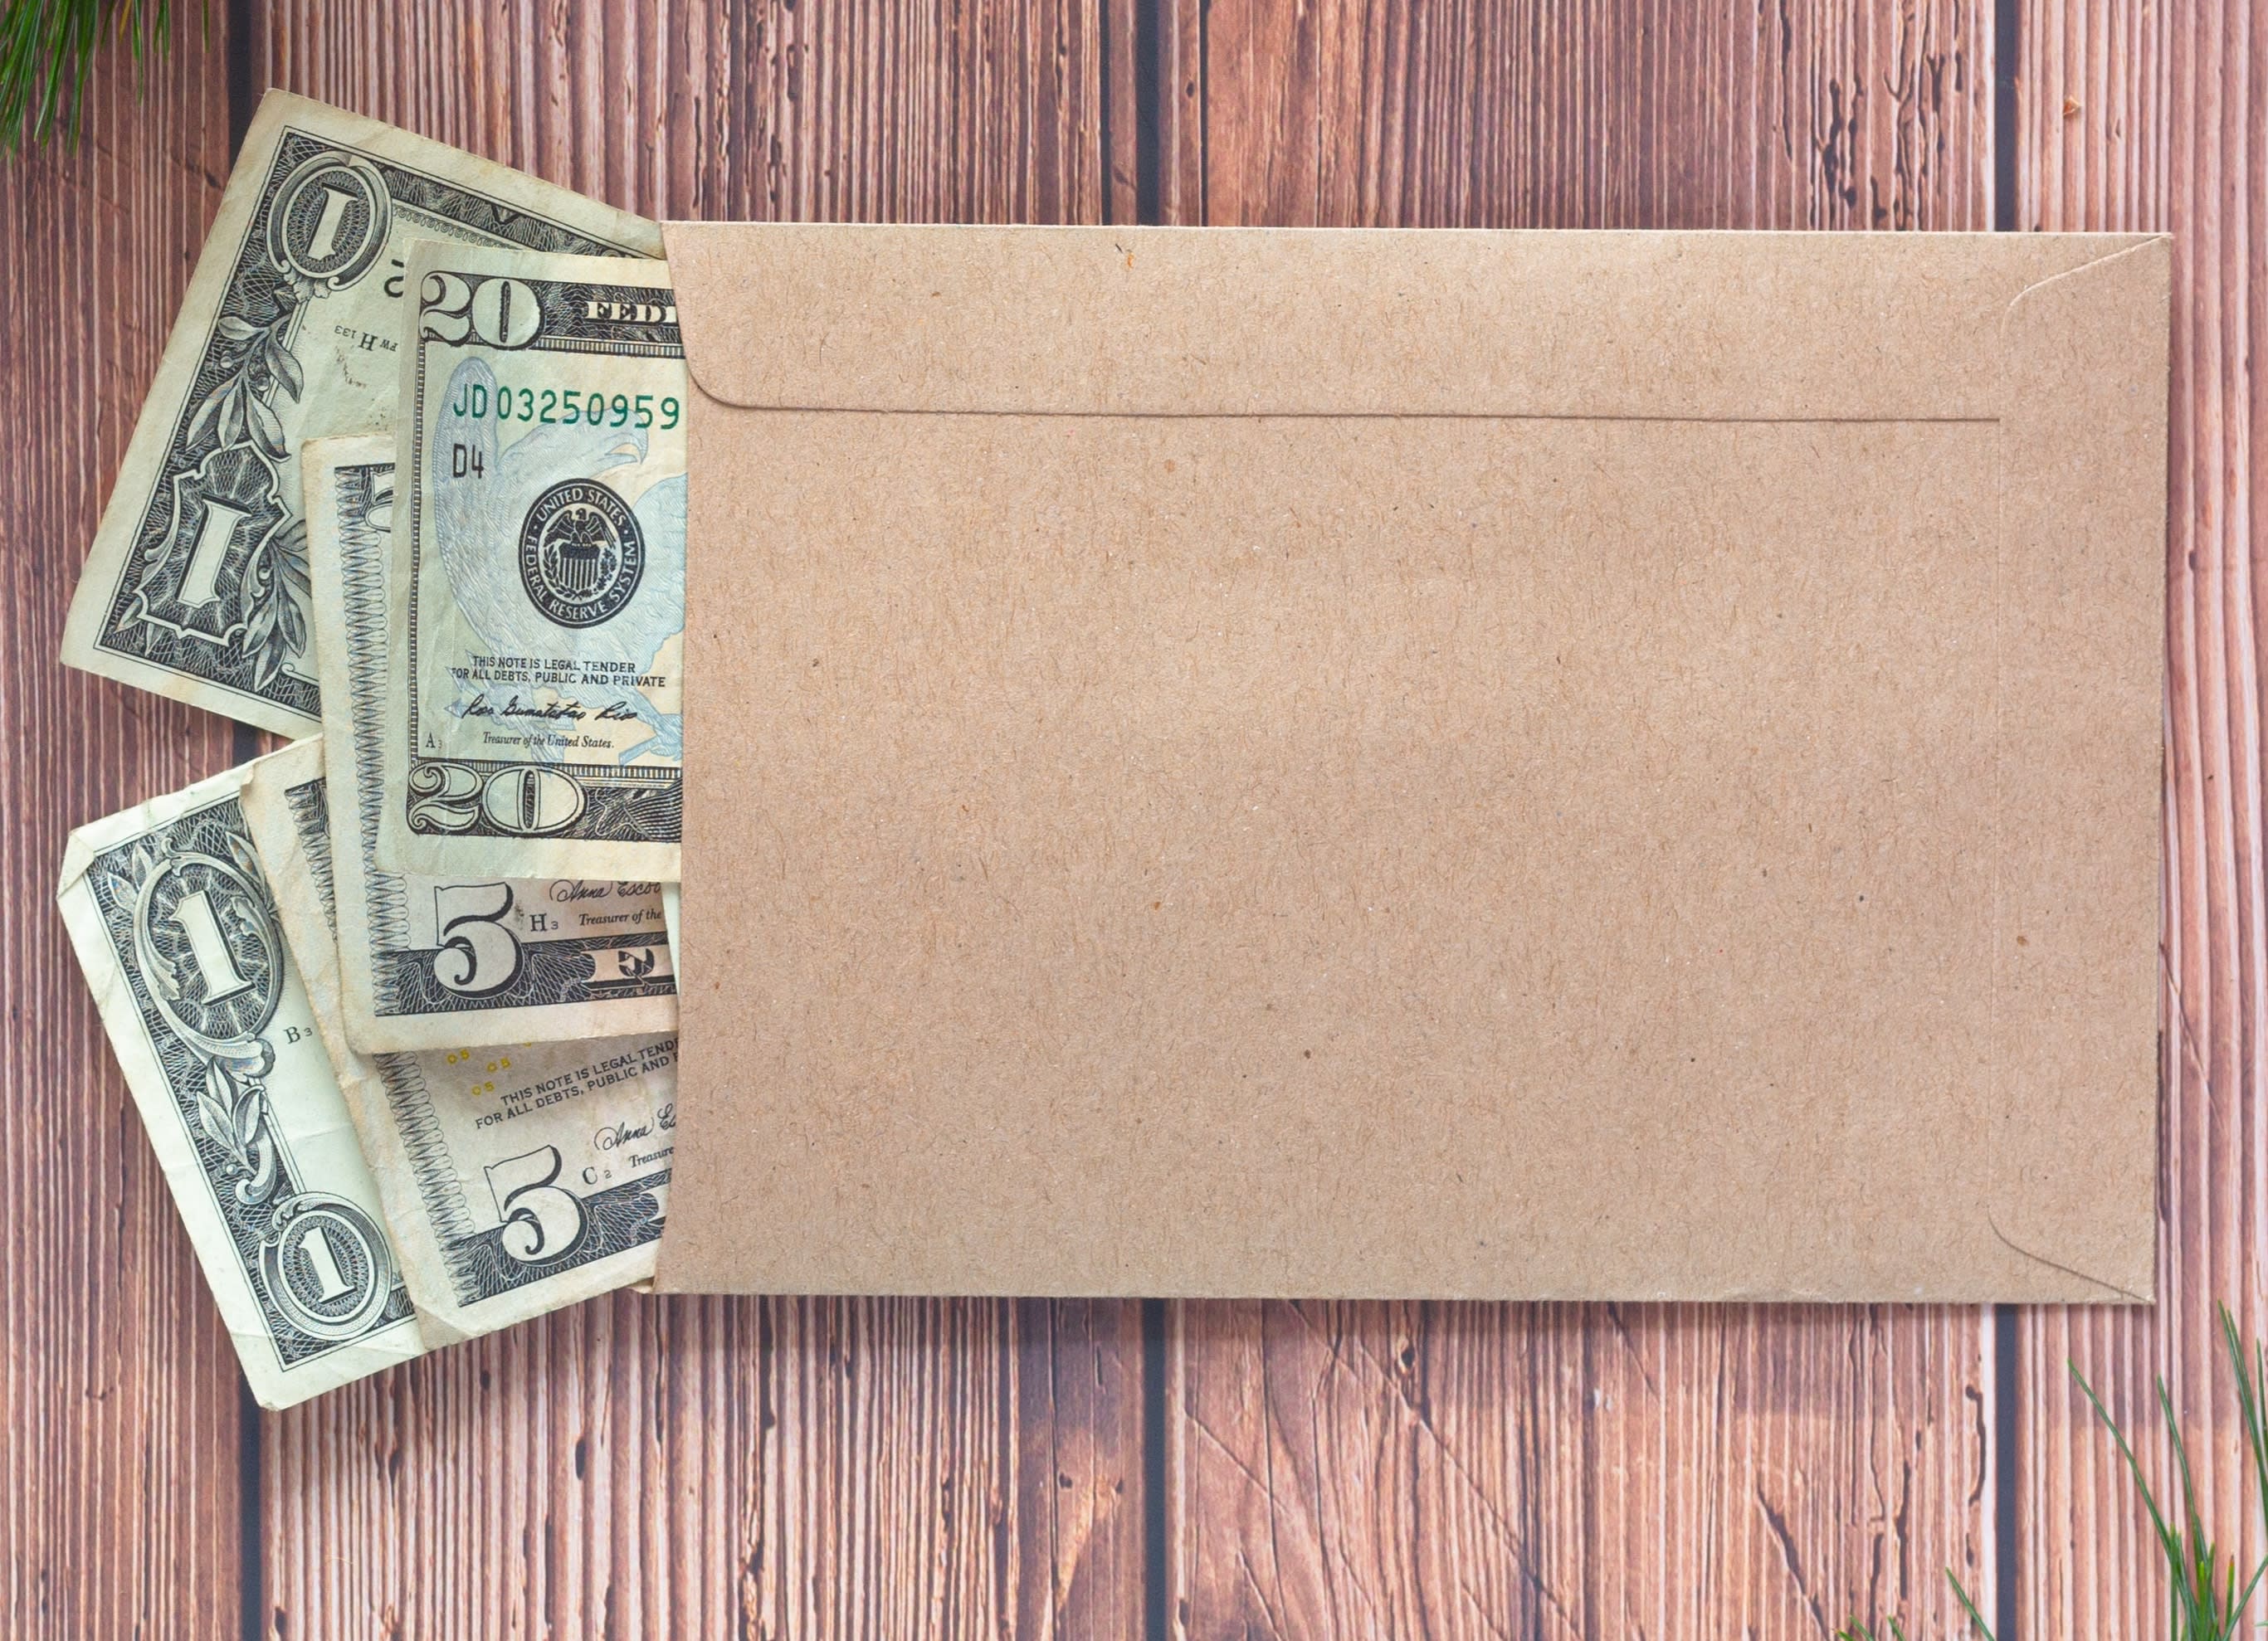 An envelope with cash